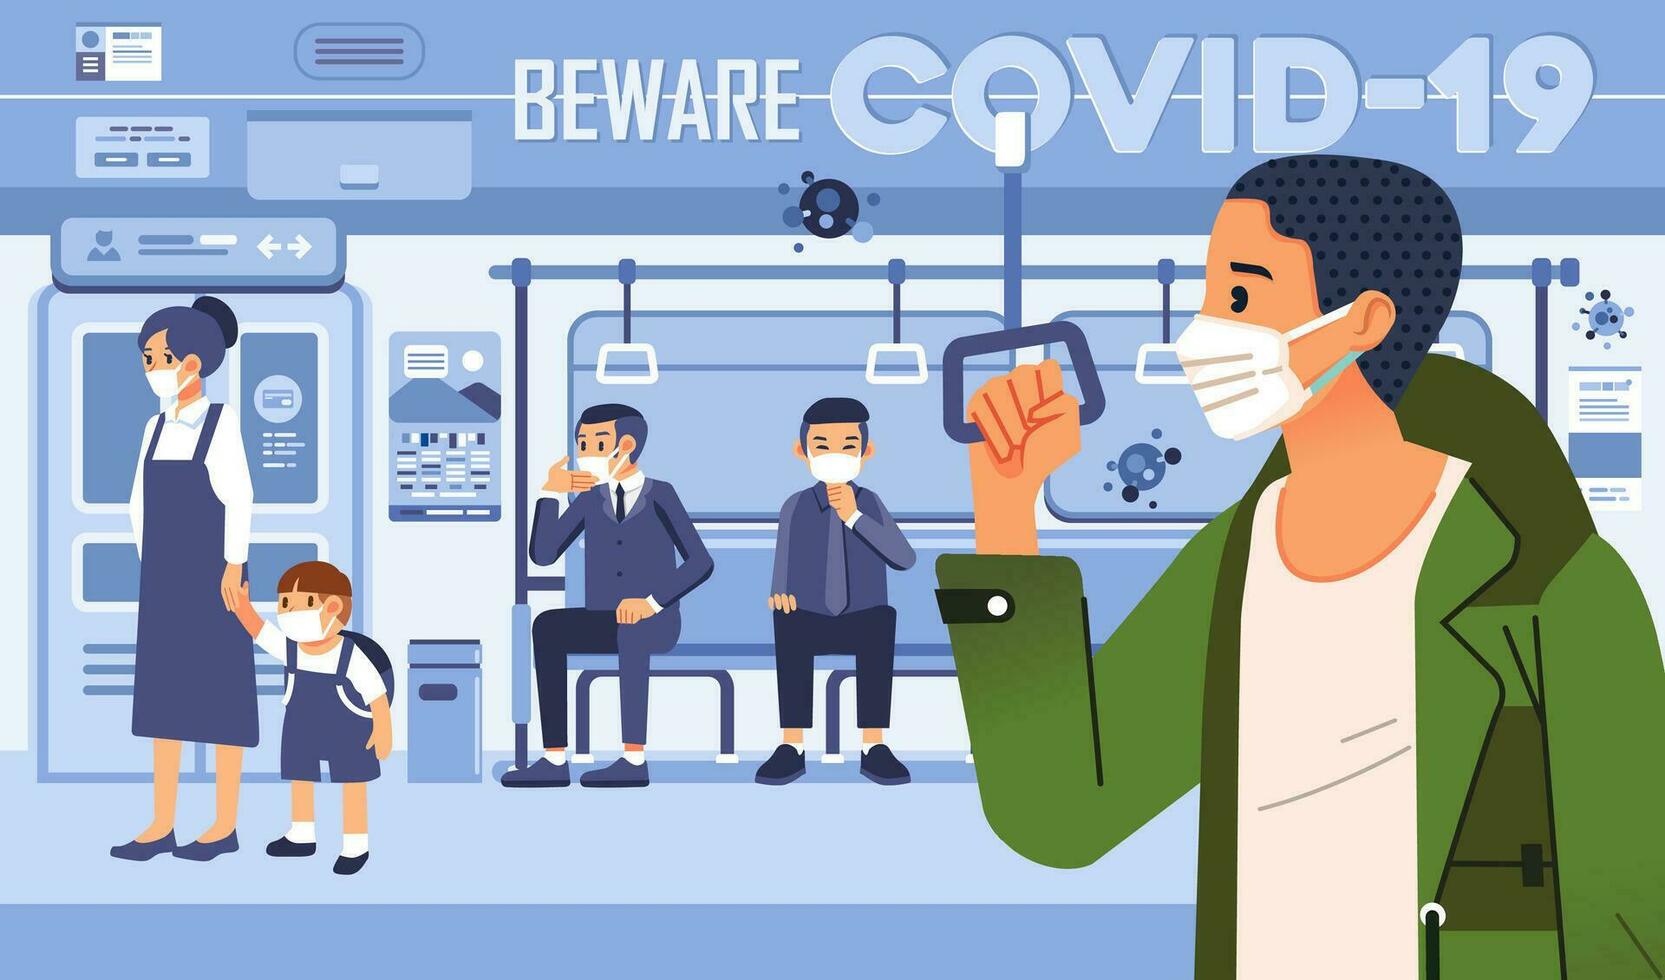 beware to covid 19 vector illustration with people in train as public transportation, social distancing and wearing mask to prevention